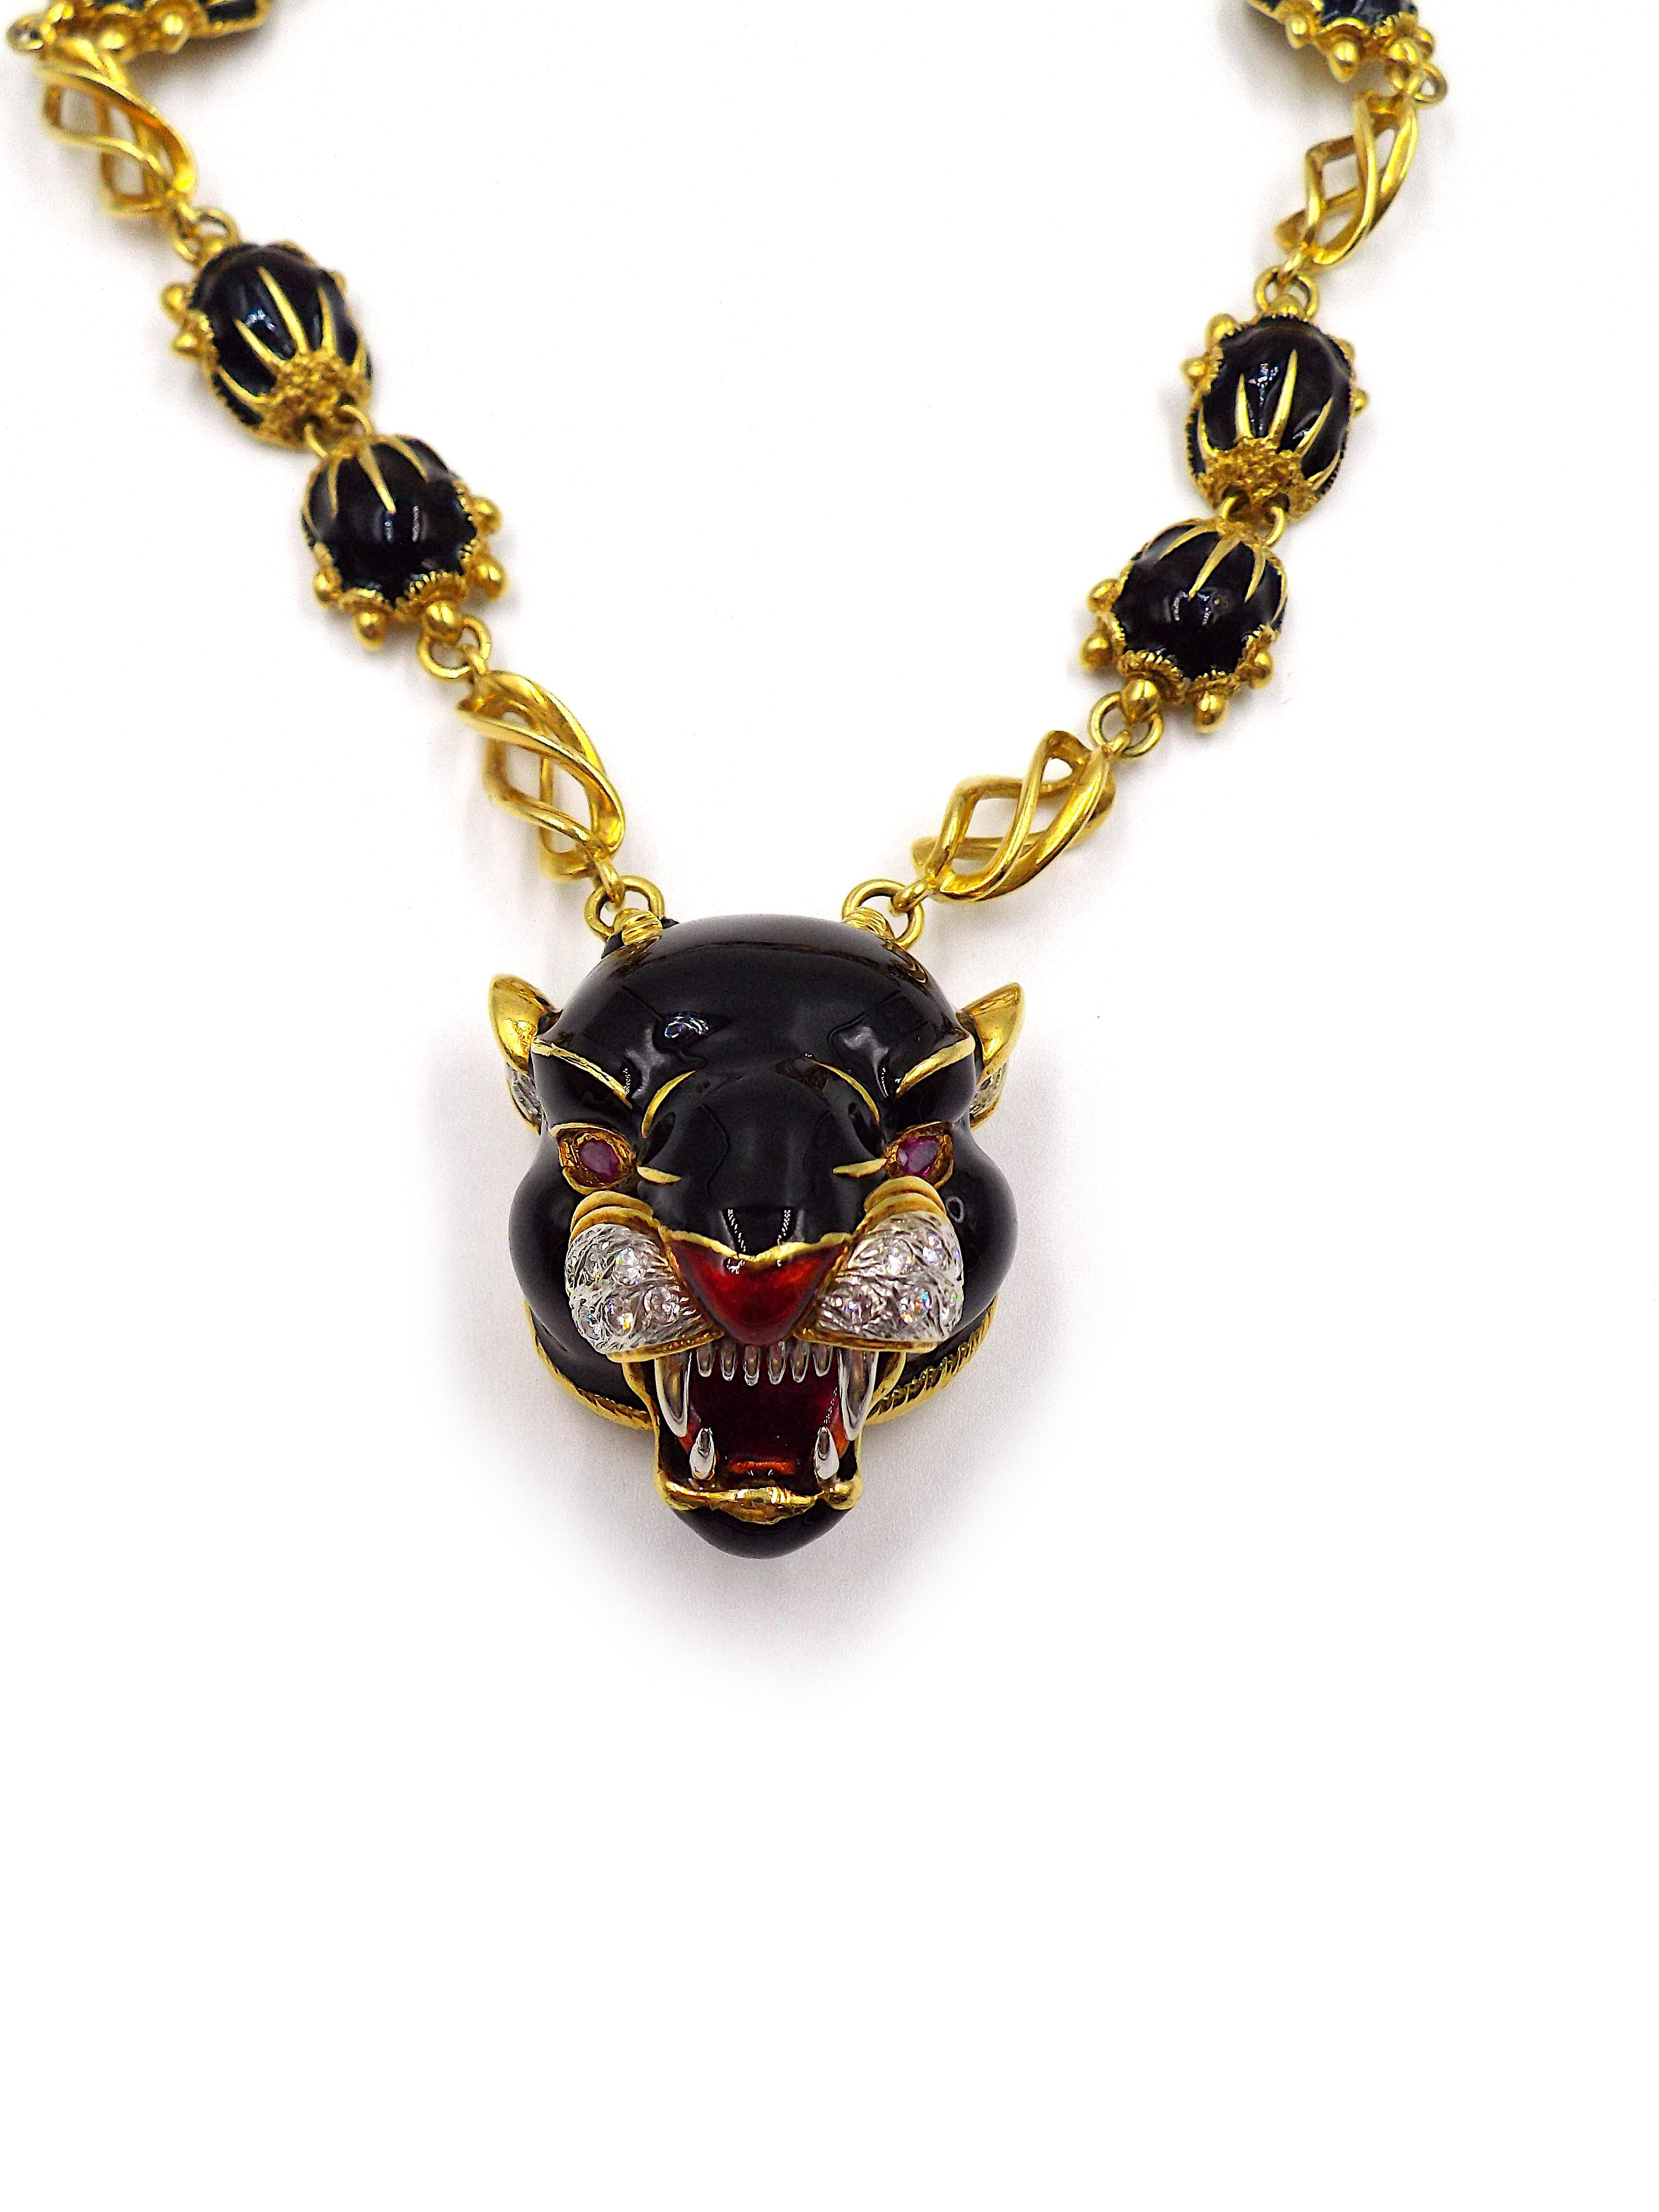 Frascarolo panther pendant sautoir in 18kt yellow gold with diamonds and black and red enamel, signed, with maker’s mark, approximately 133grs. Italy, circa 1970s.